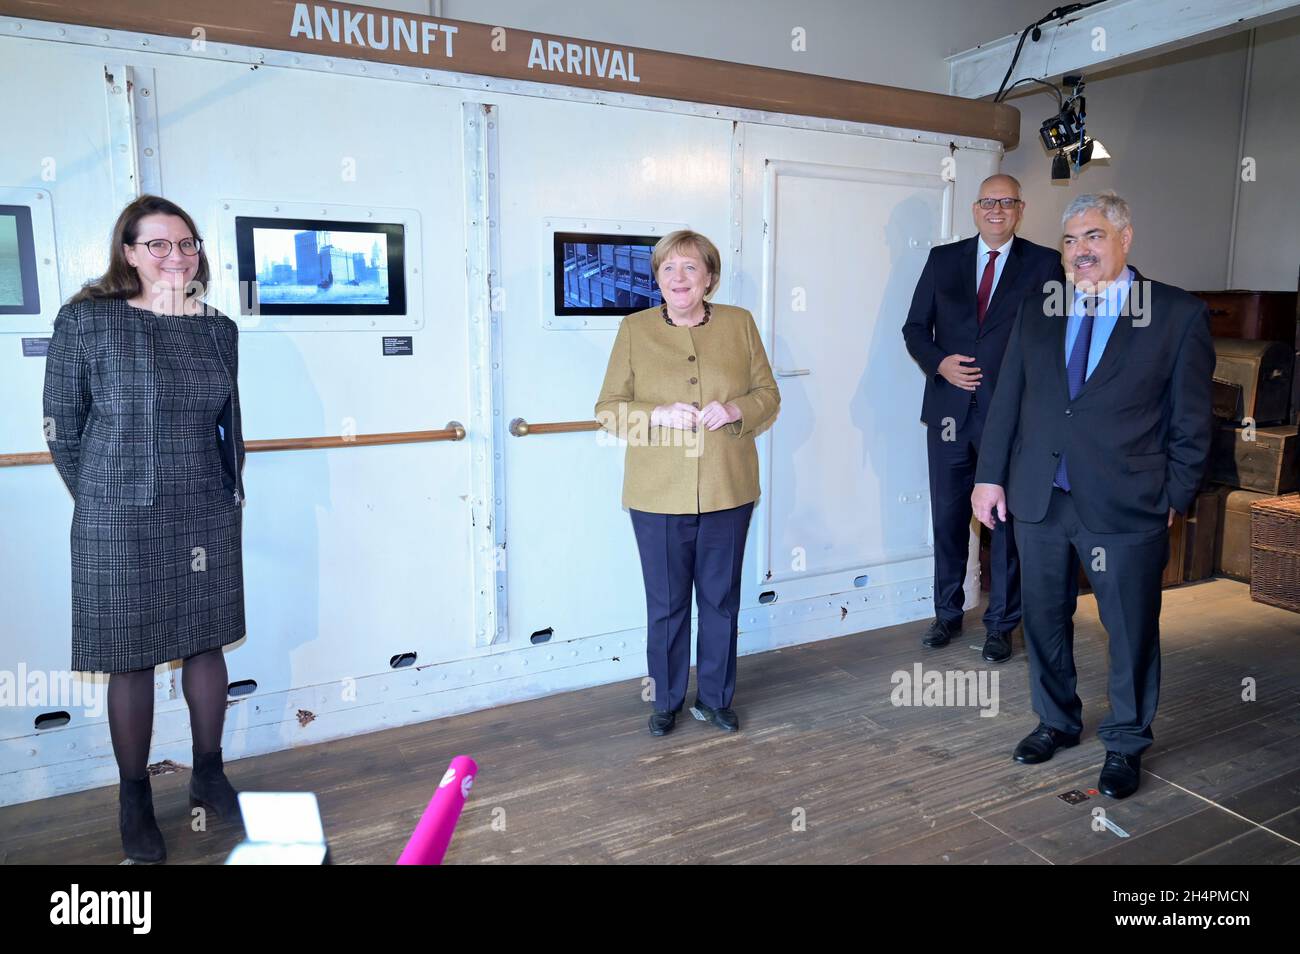 Bremerhaven, Germany. 04th Nov, 2021. The outgoing German Chancellor Angela Merkel (CDU, 2nd from left) stands in the Migration Museum Deutsches Auswandererhaus next to Director Simone Blaschka (l), Andreas Bovenschulte (2nd from right), Mayor of Bremen, and Melf Grantz (r), Lord Mayor of Bremerhaven. The outgoing German Chancellor has arrived in Bremerhaven for her farewell visit. Credit: Fabian Bimmer/Reuters Pool X02840/dpa/Alamy Live News Stock Photo